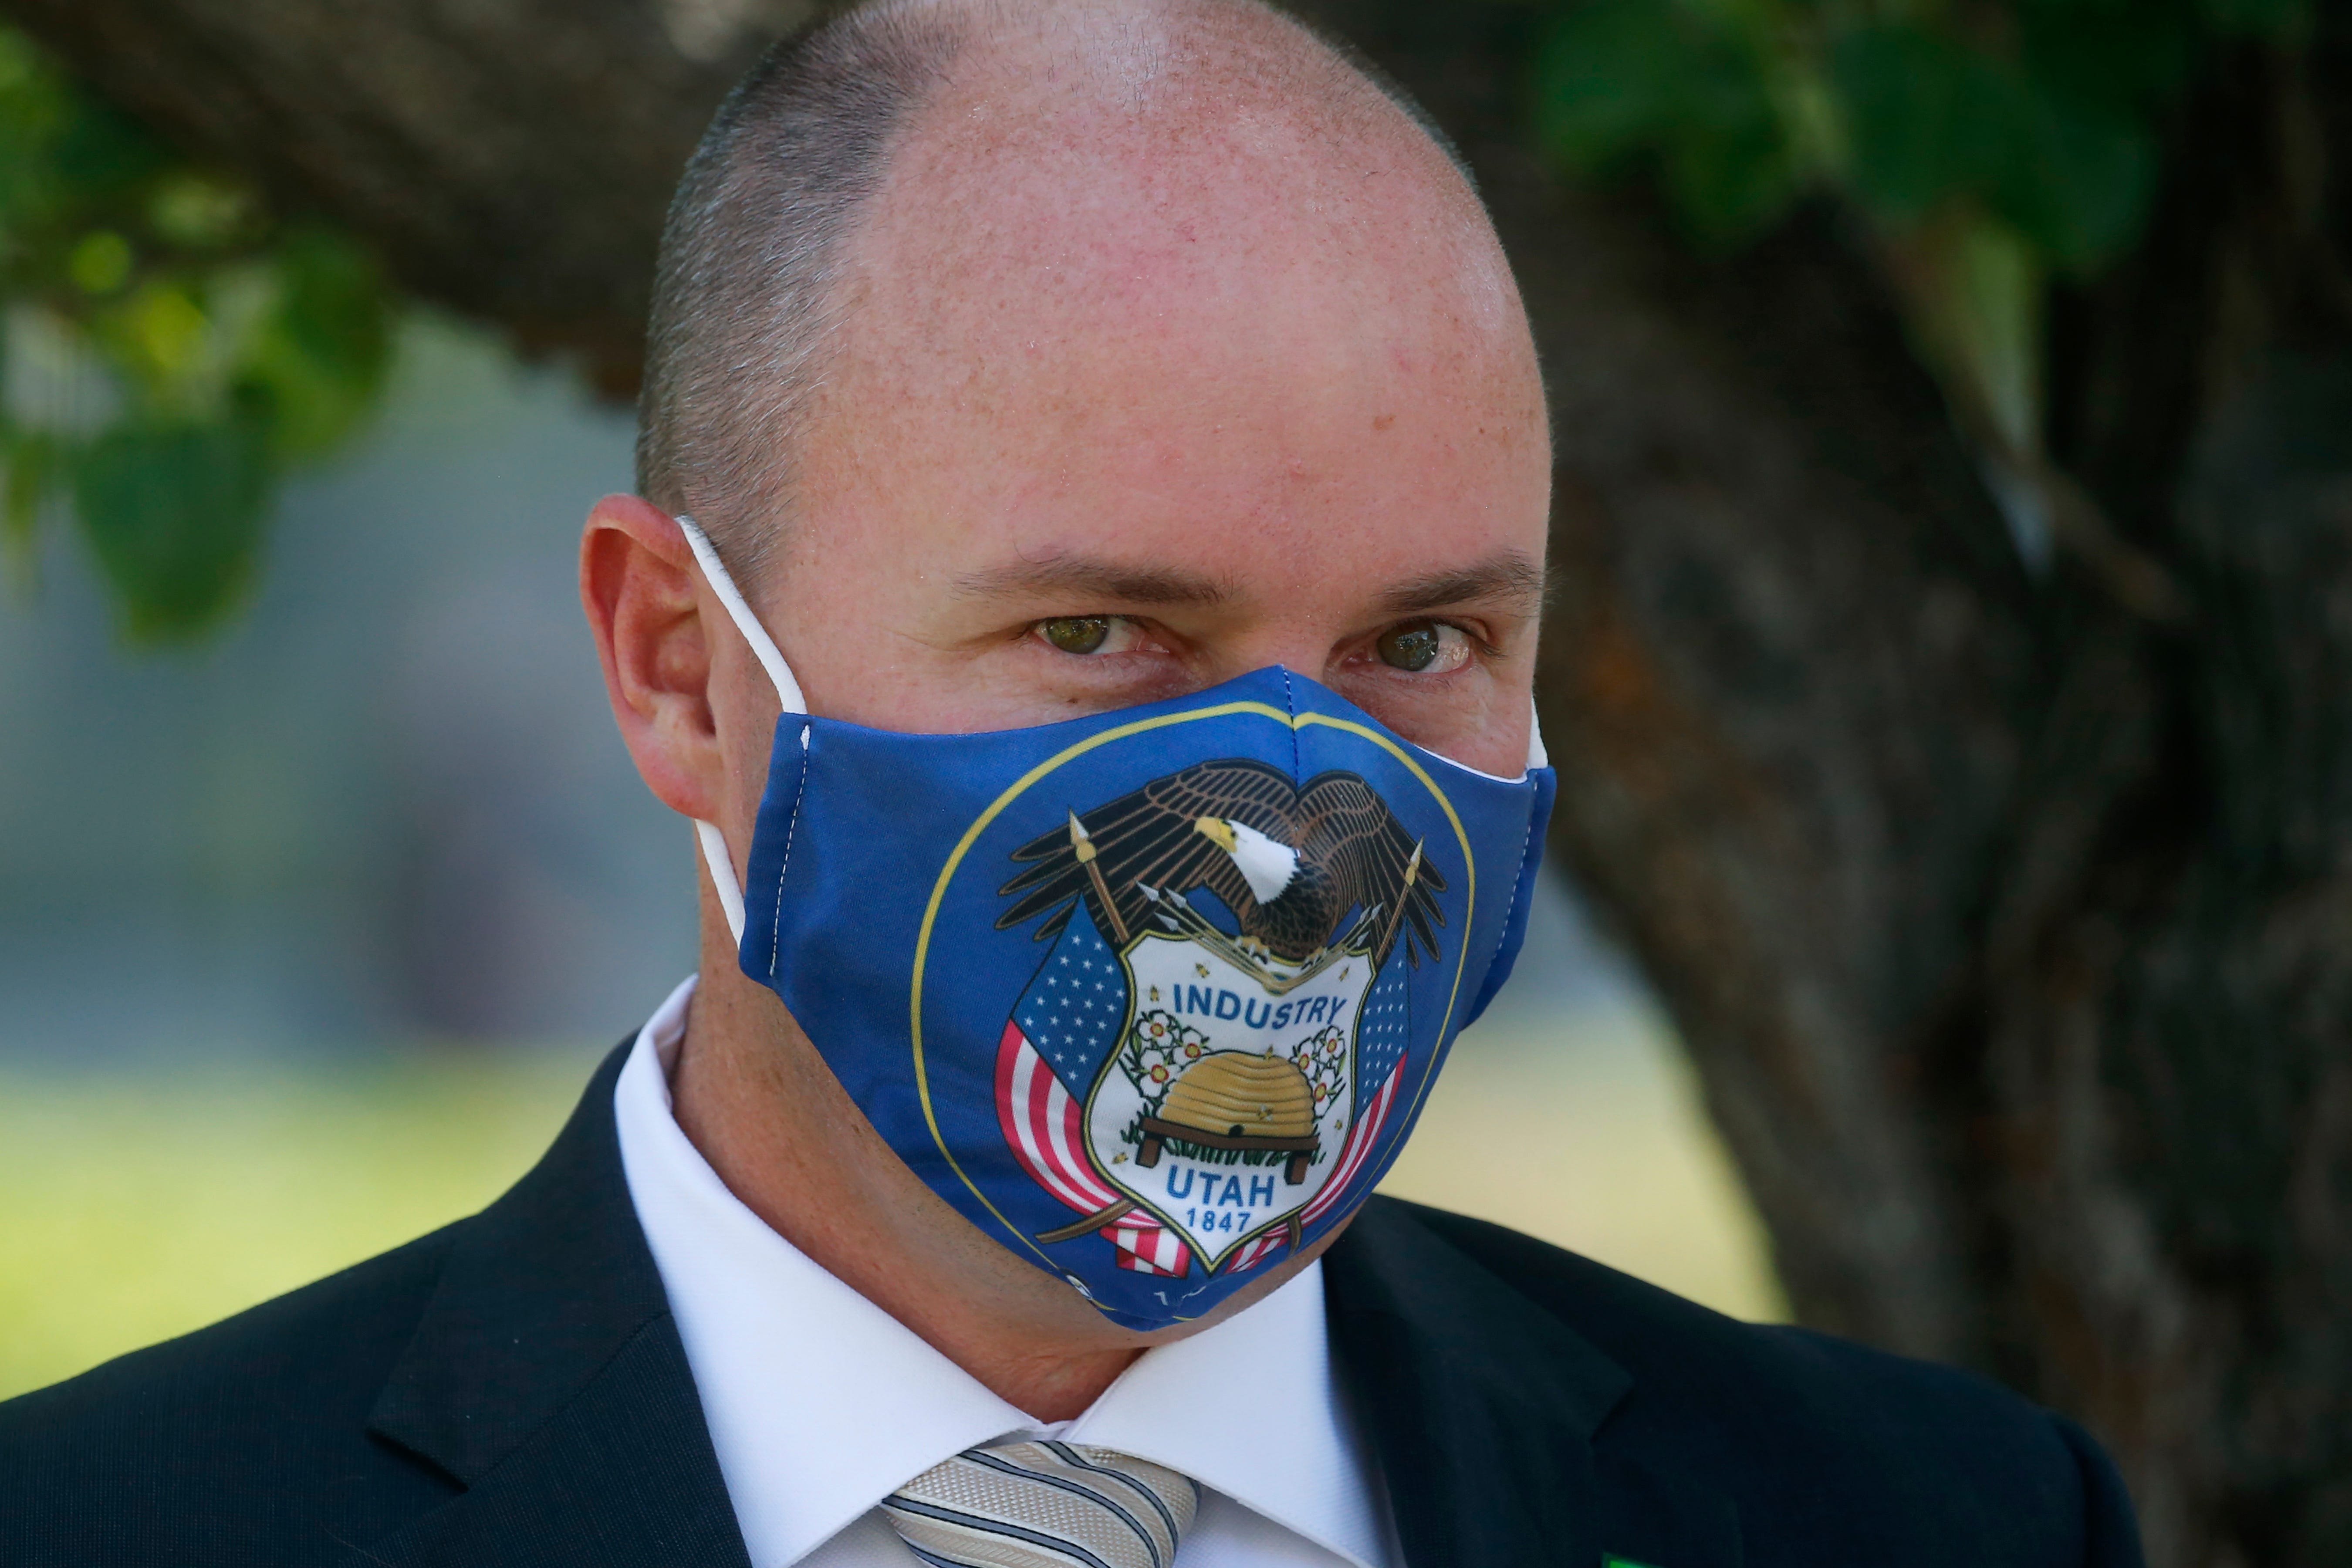 Utah Republican Lt. Gov Spencer Cox arrives for a press conference at the Utah State Capitol in Salt Lake City on July 7, 2020. Cox was a big proponent for Nomi Health and pushed for the company to get no-bid contracts for COVID testing in Utah. He was elected governor in November 2020.